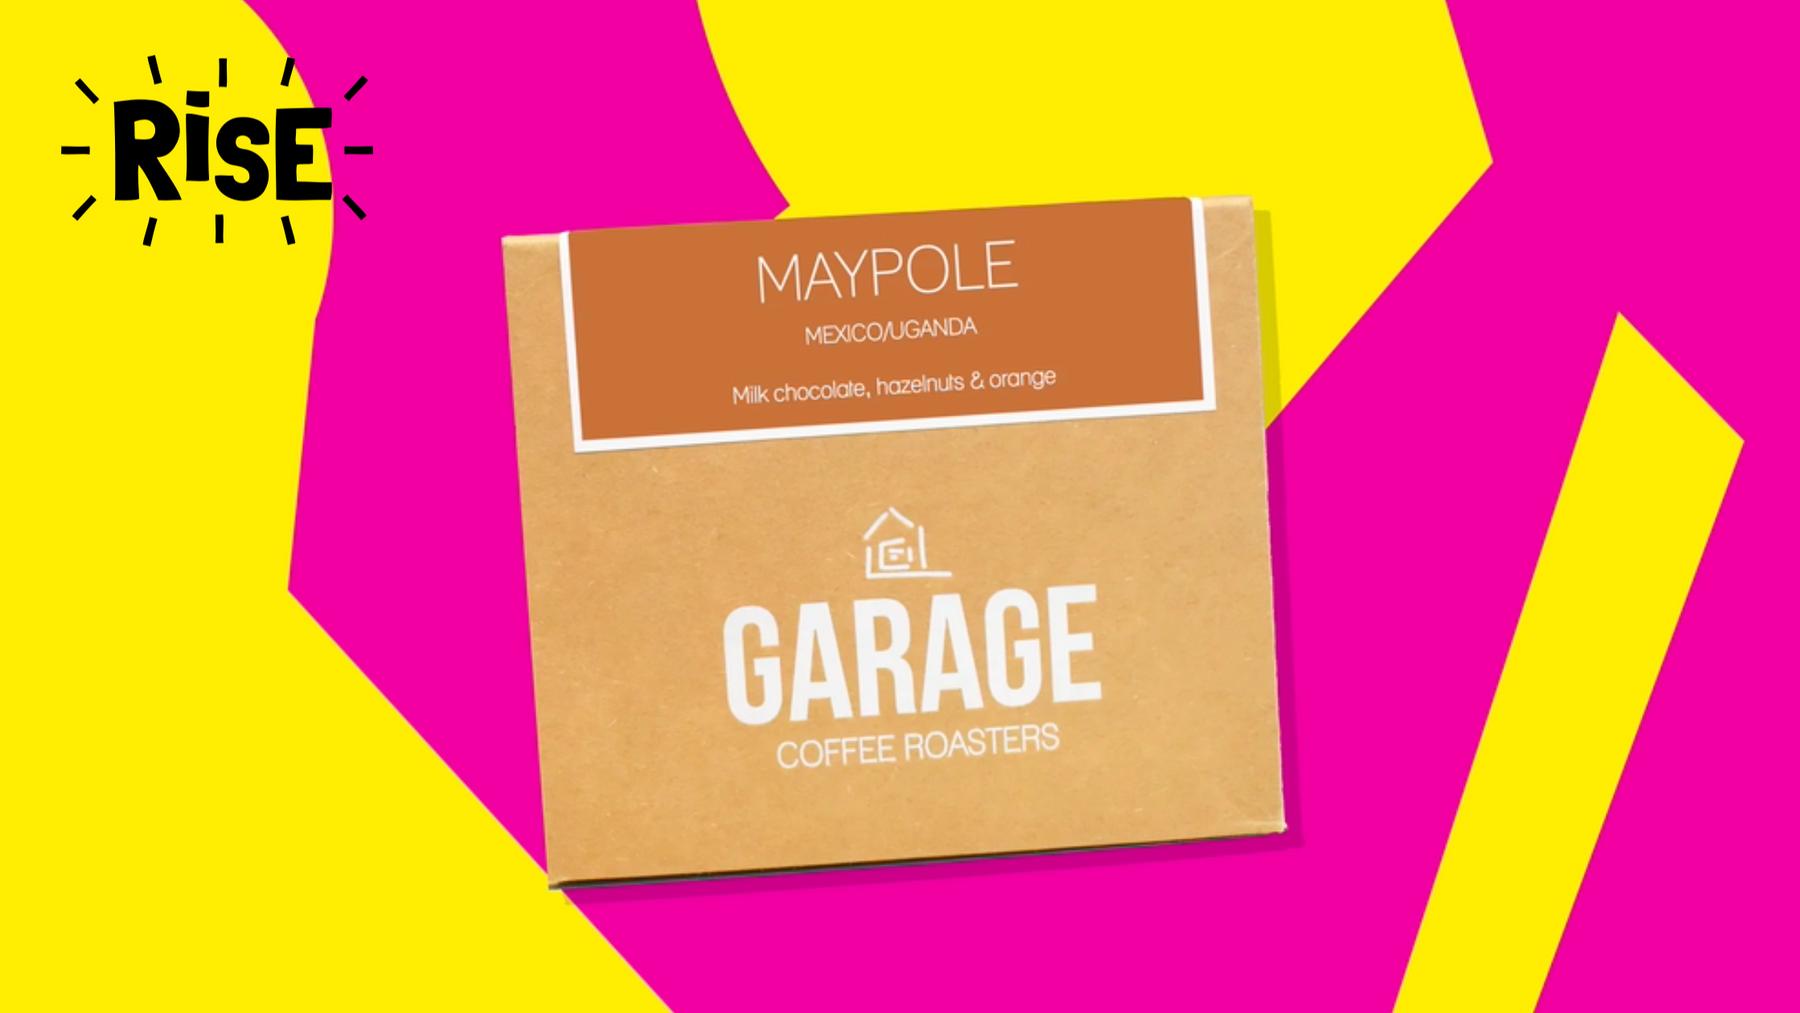 RiSE coffee box reviews our Maypole blend!